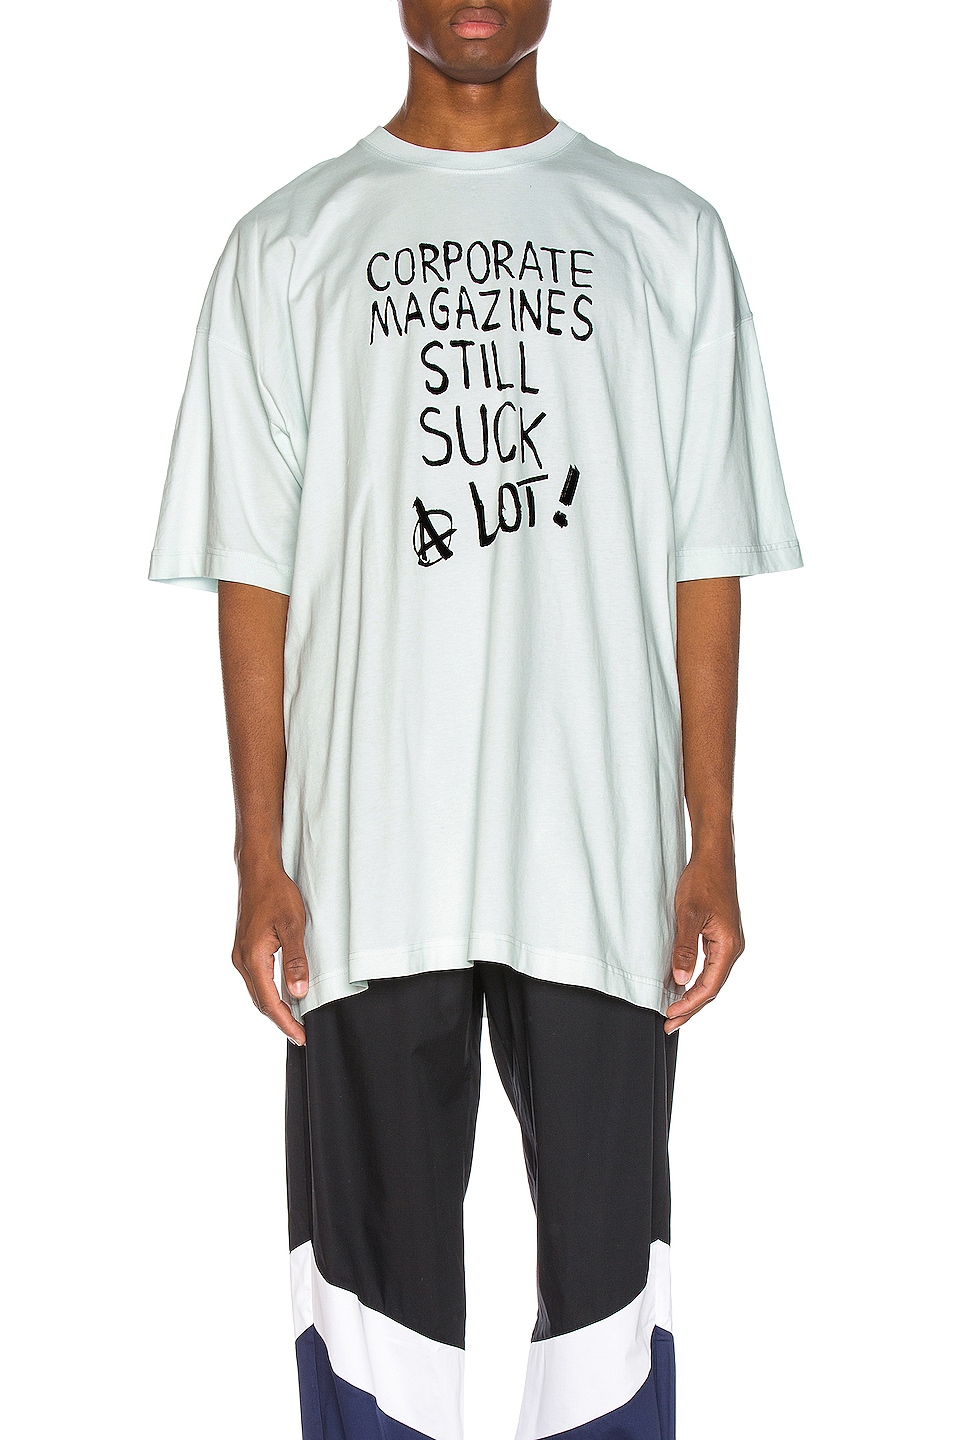 Image 1 of VETEMENTS Corporate Magazine Tee in Off White